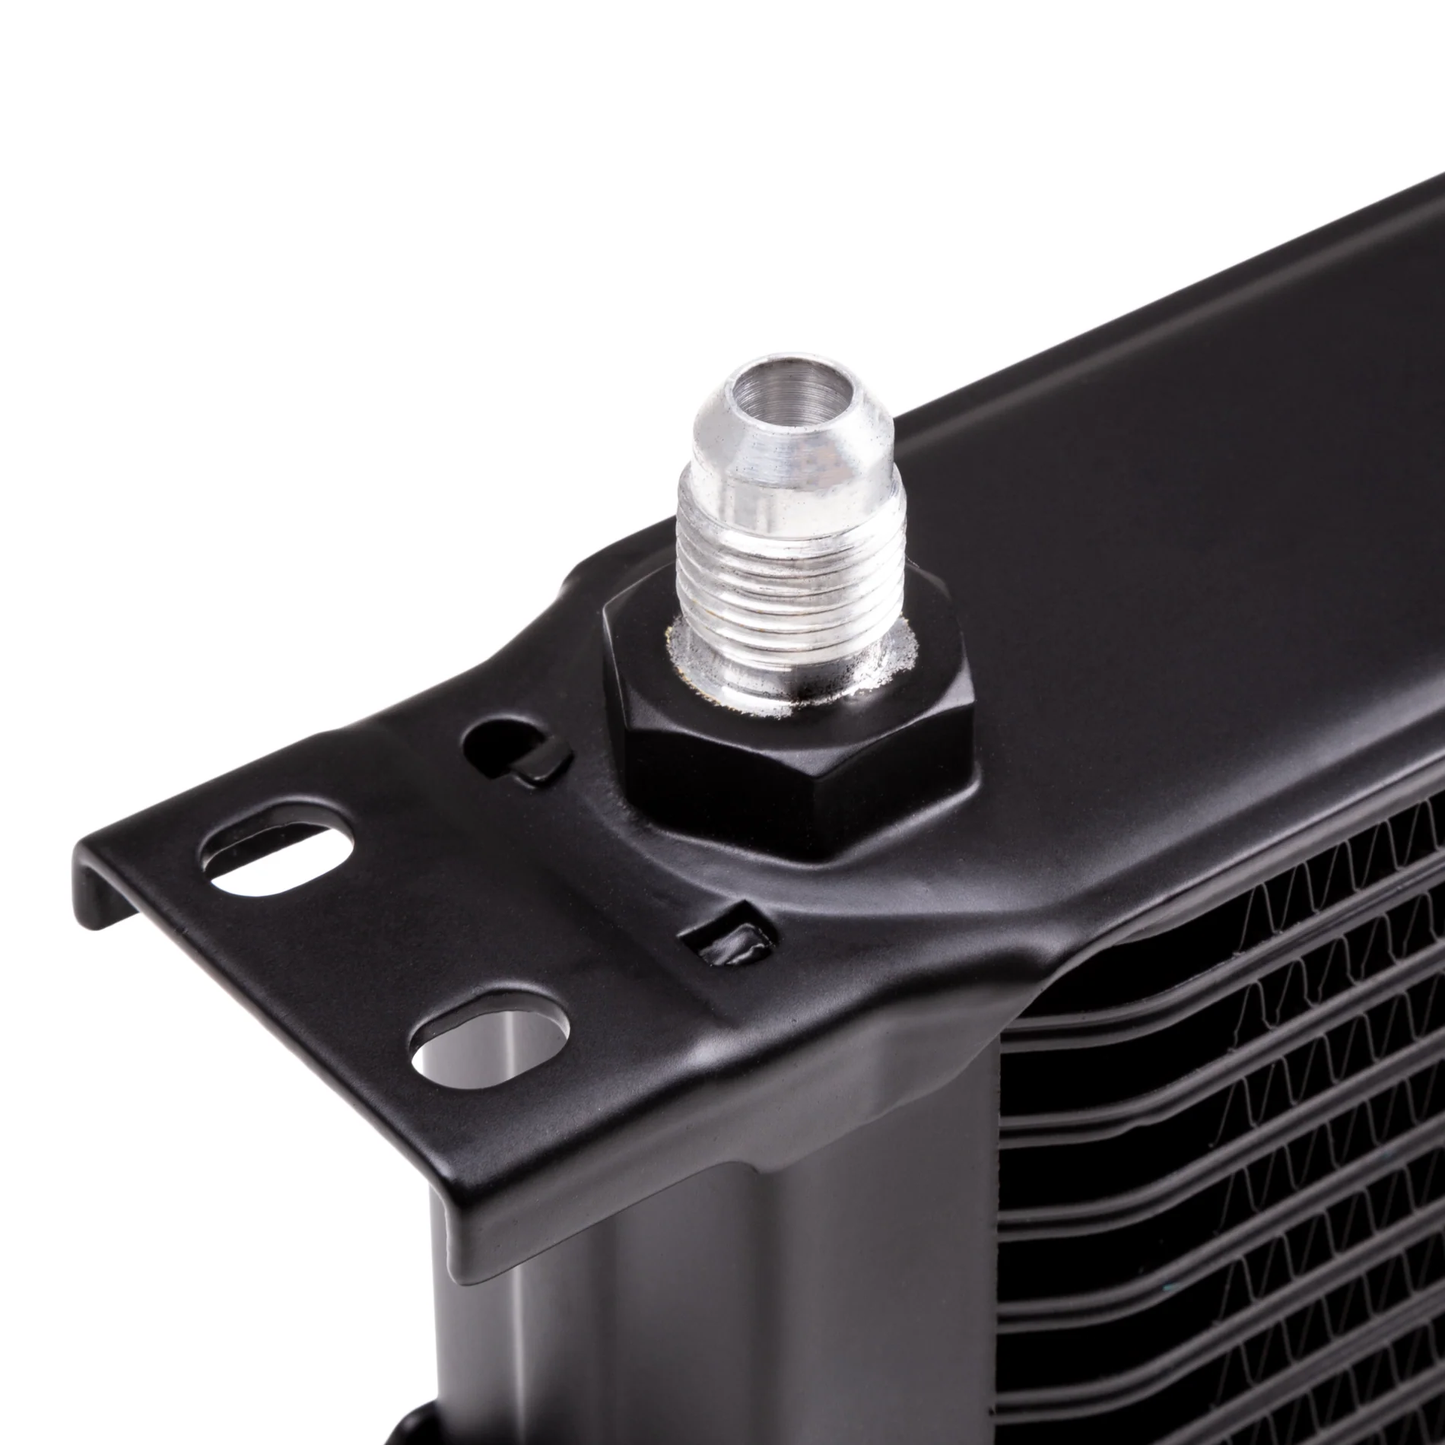 Chase Bays - Chase Bays Oil Cooler